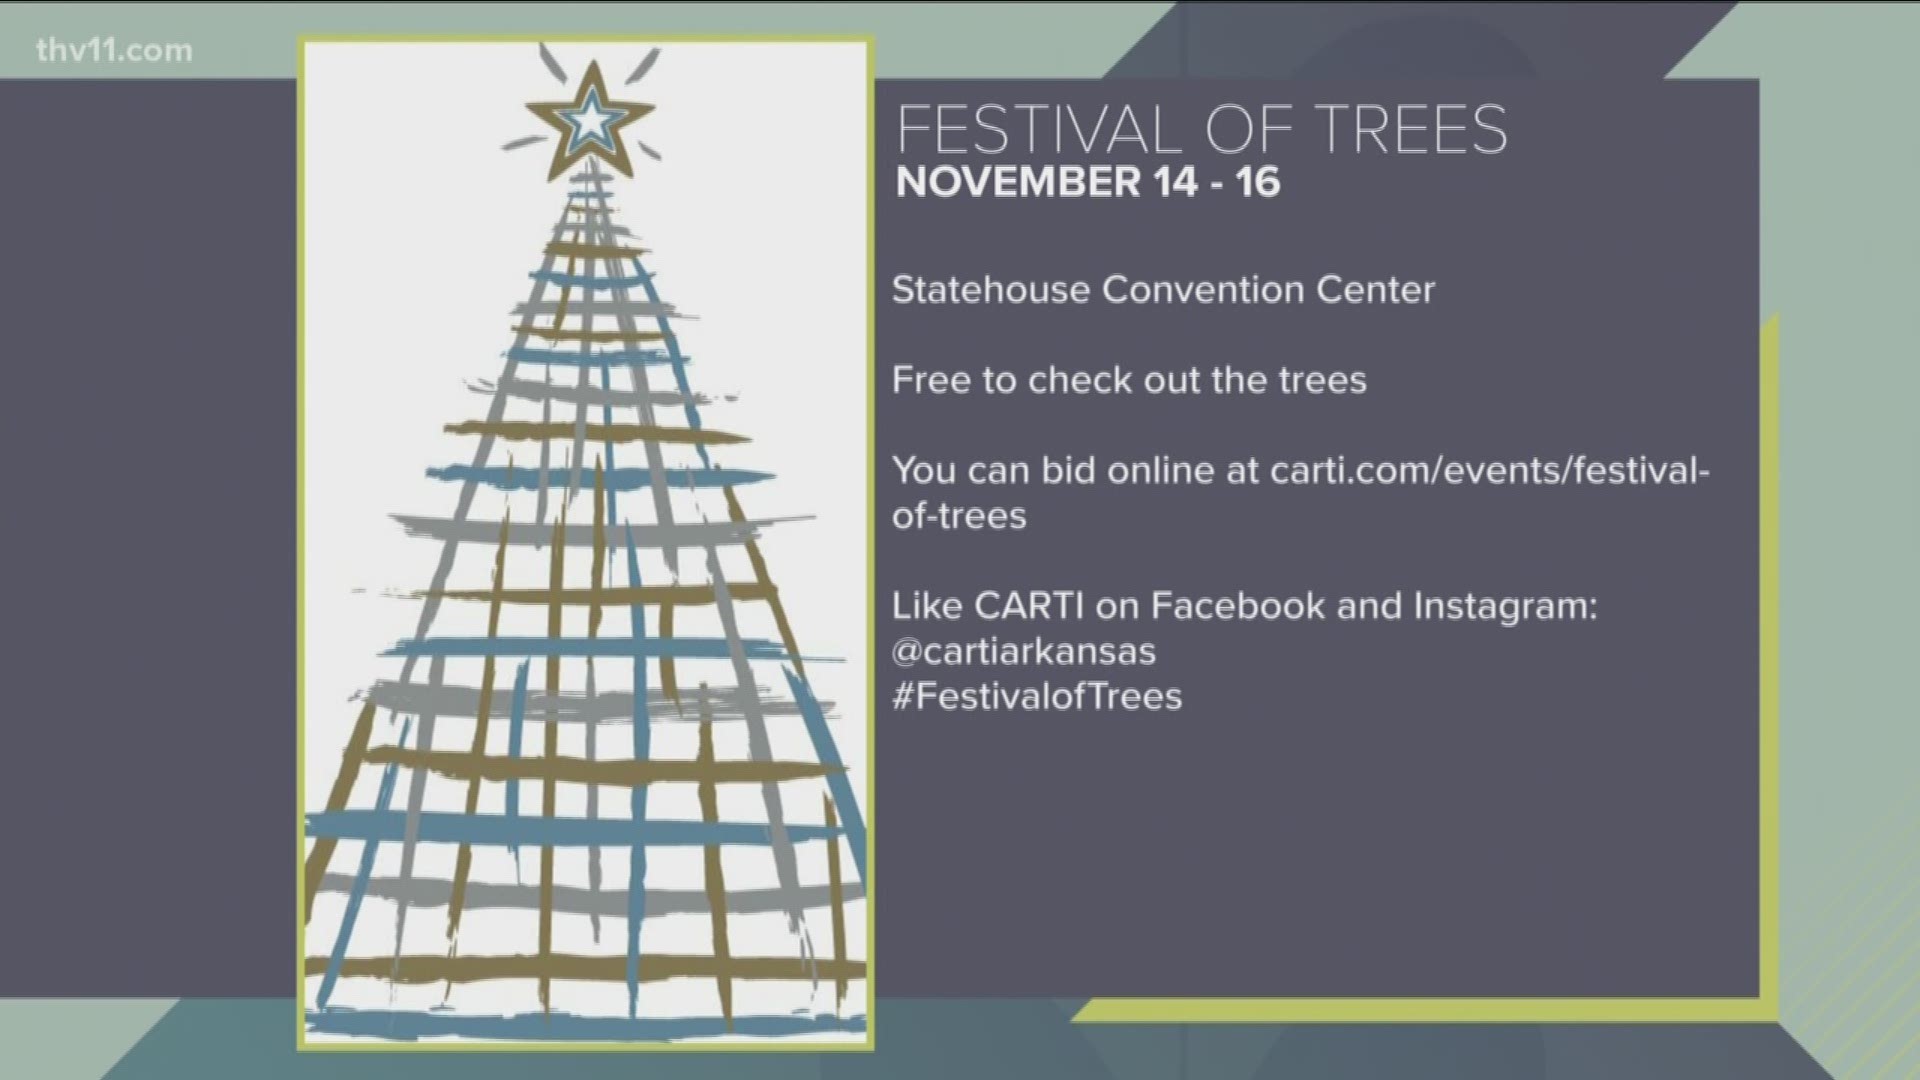 The Festival of Trees is a trio of fun events, 'Sugar Plum Ball', 'Festival of Fashion', and 'Tux'n Trees'.